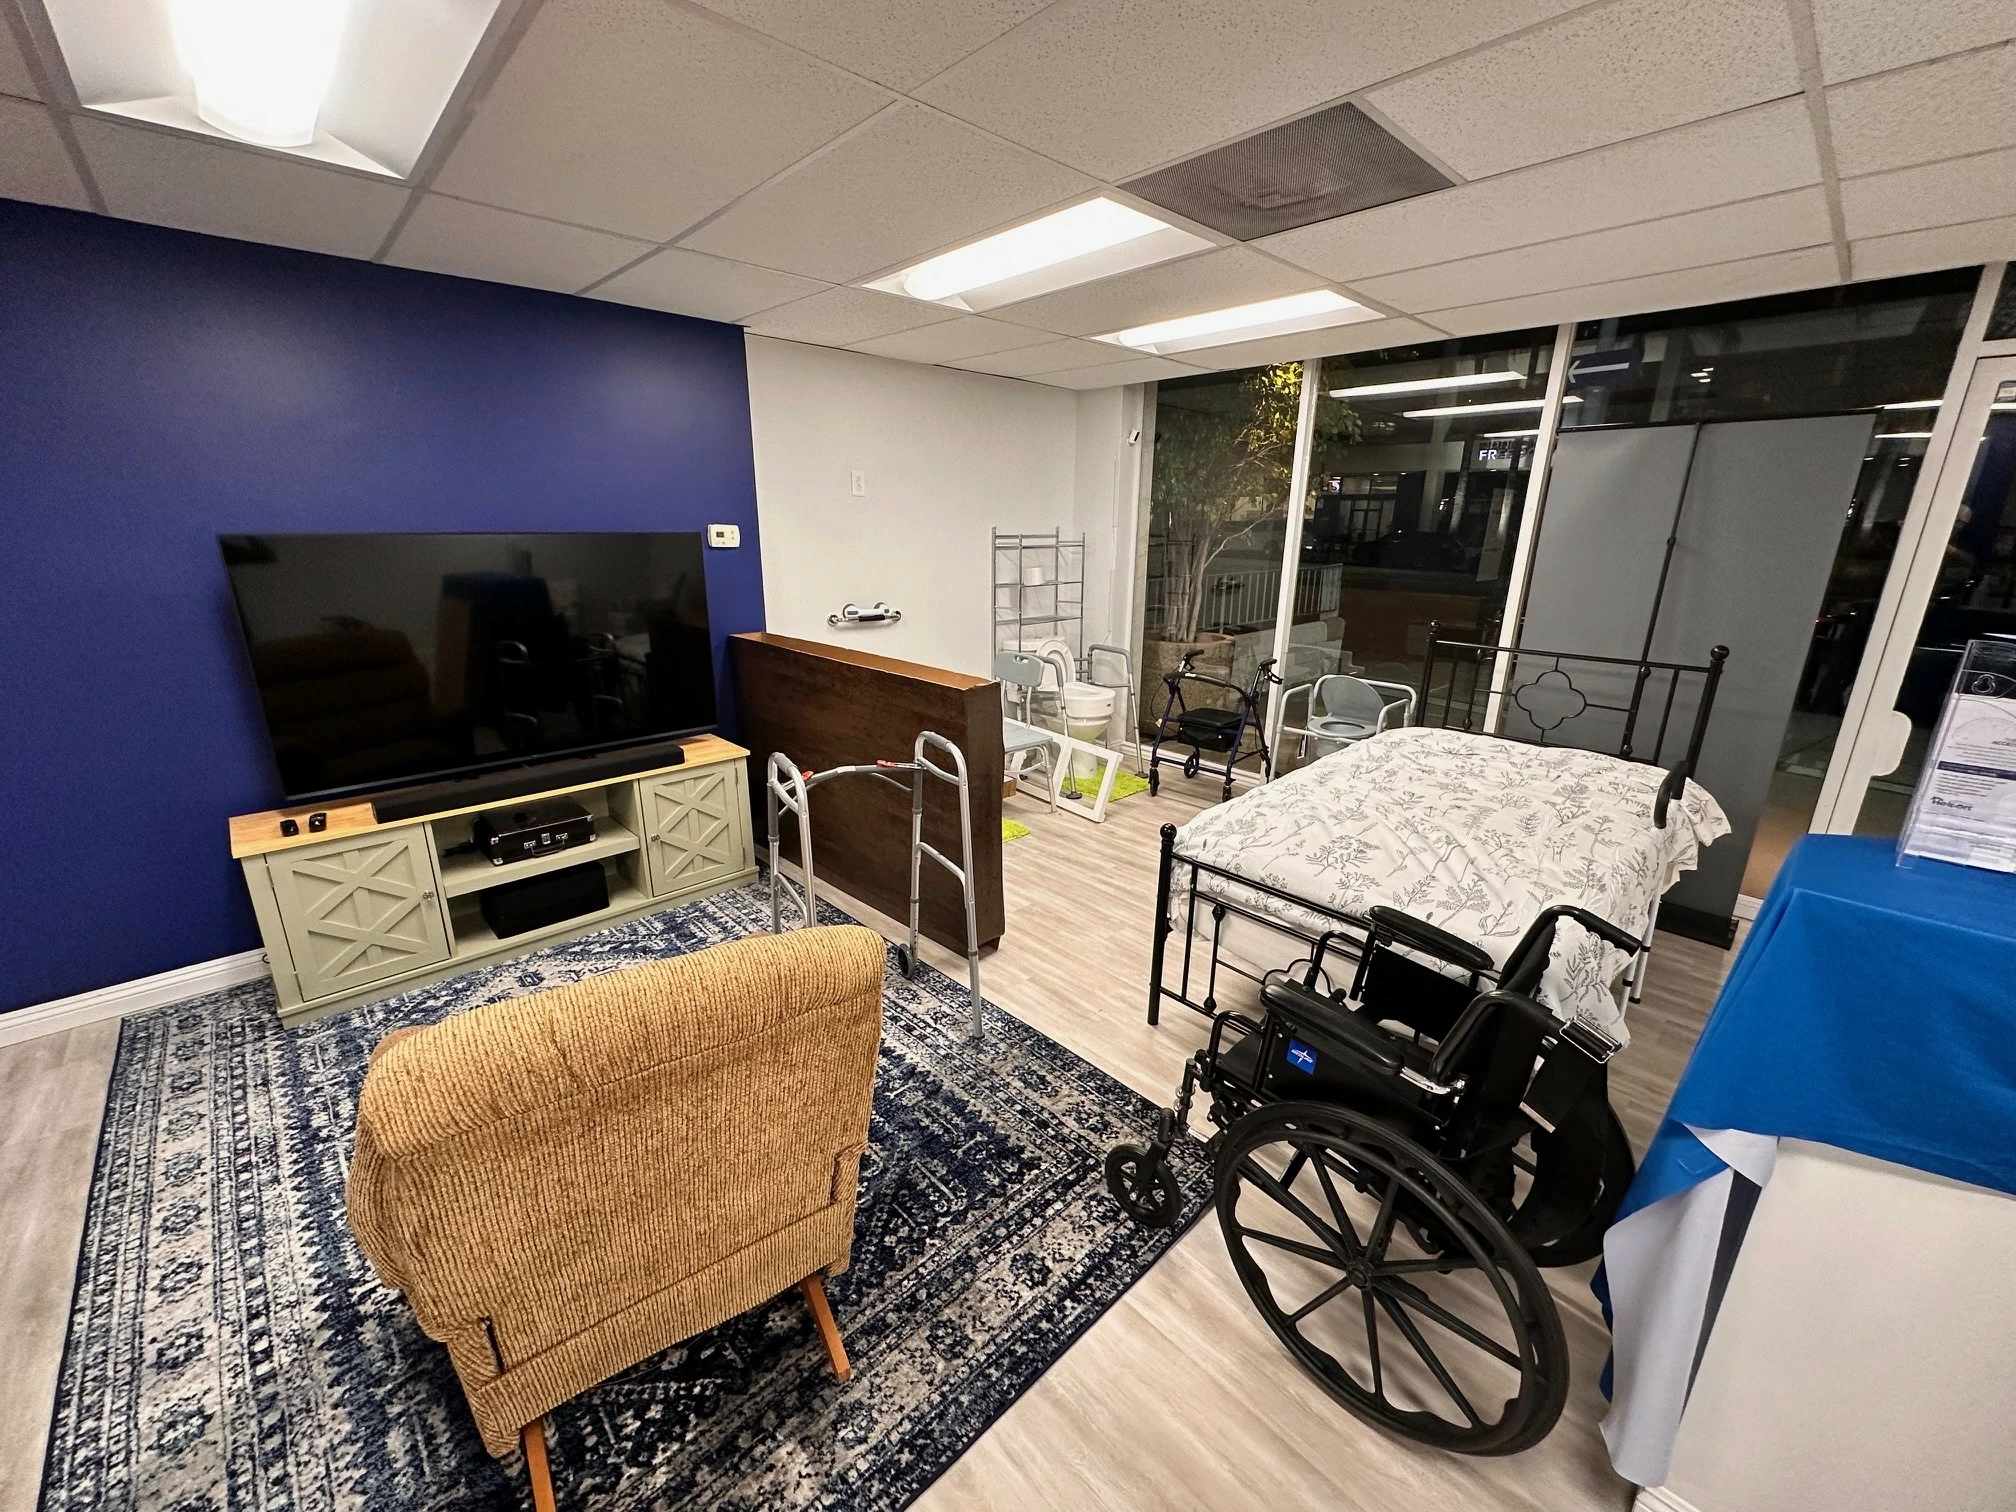 Check out our Center of Excellence, a training space designed as a realistic simulation of a client’s home. We offer hands on training to caregivers and members of the community to help them better identify hazardous items and learn more about the safety of a seniors’ home.